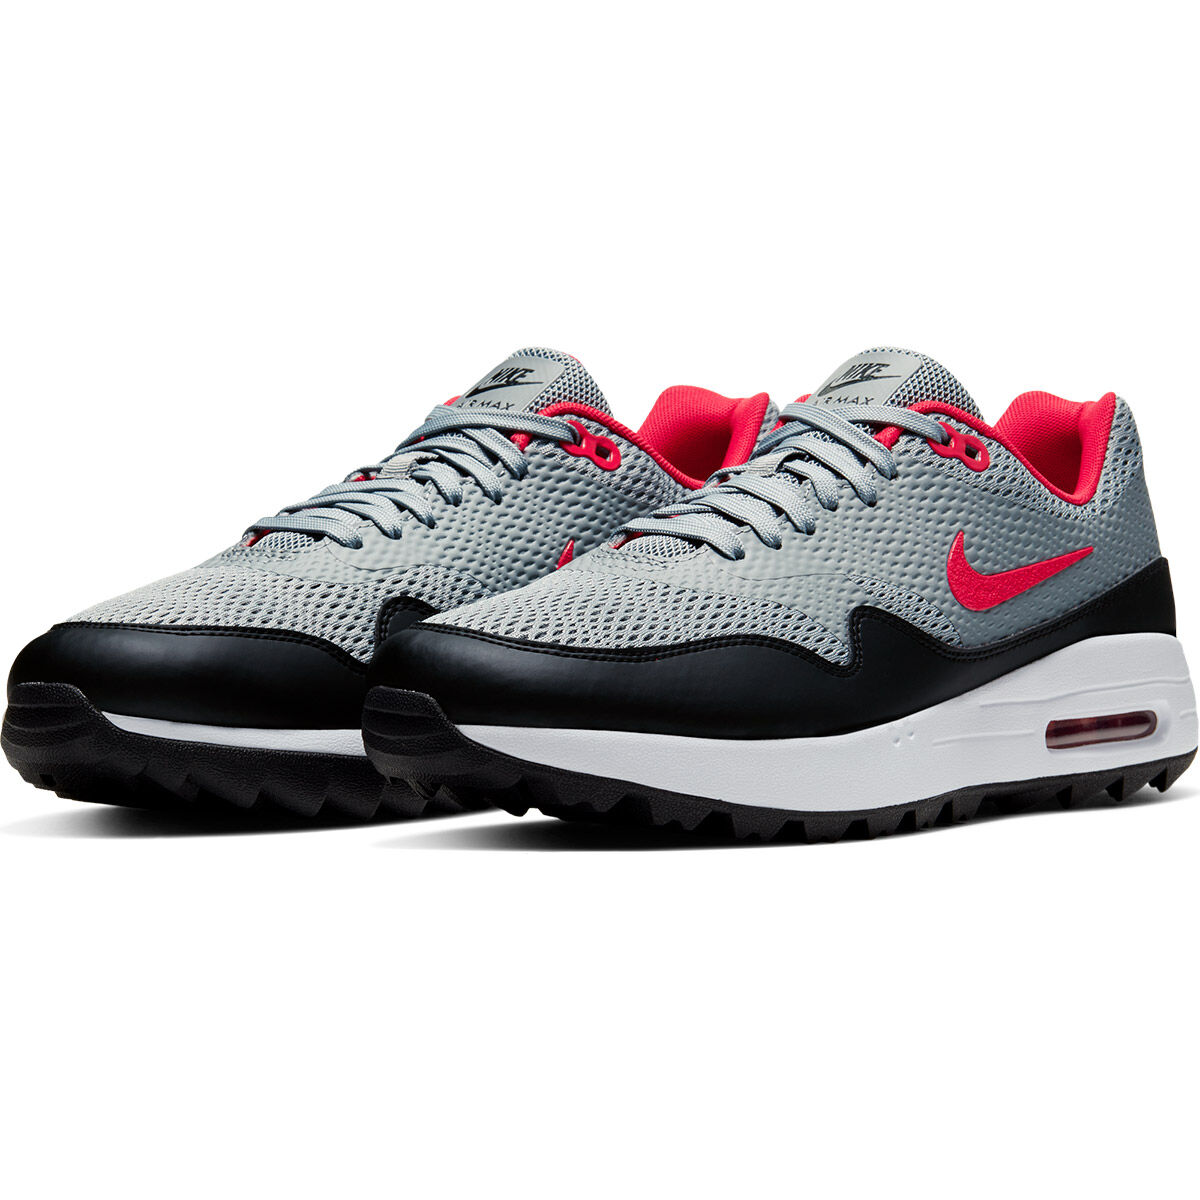 Nike Golf Air Max 1G Shoes 2020 from 